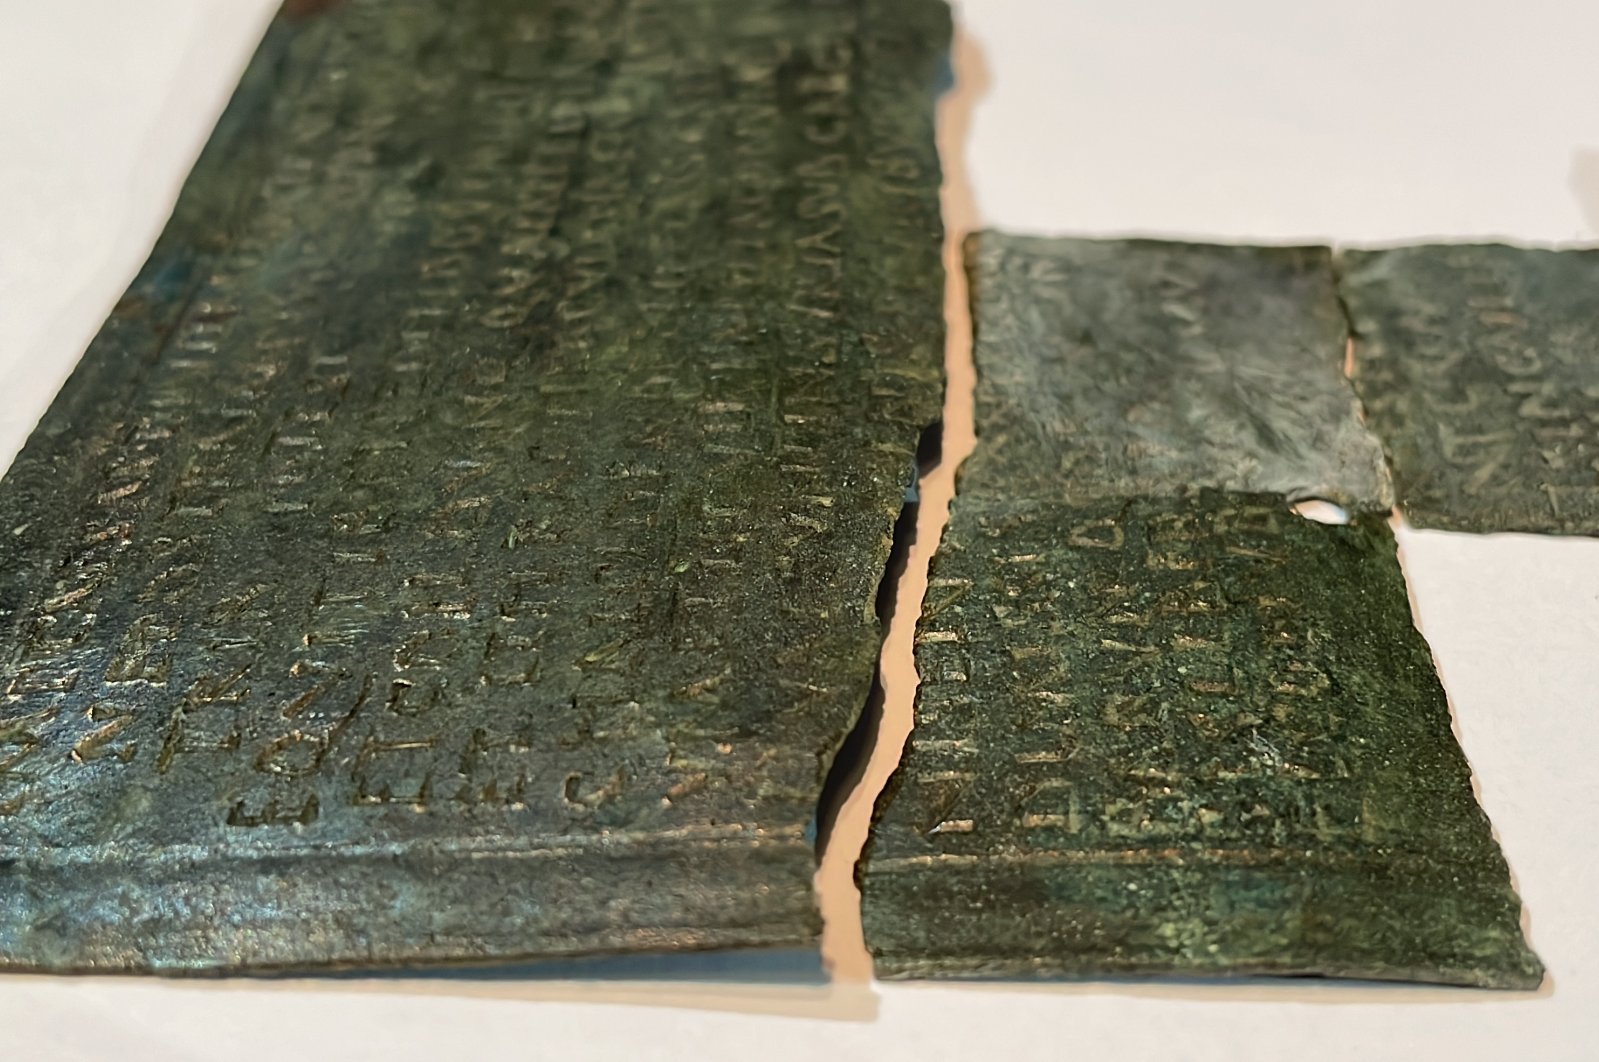 1,898-year-old bronze military diploma found in Turkey’s Perre